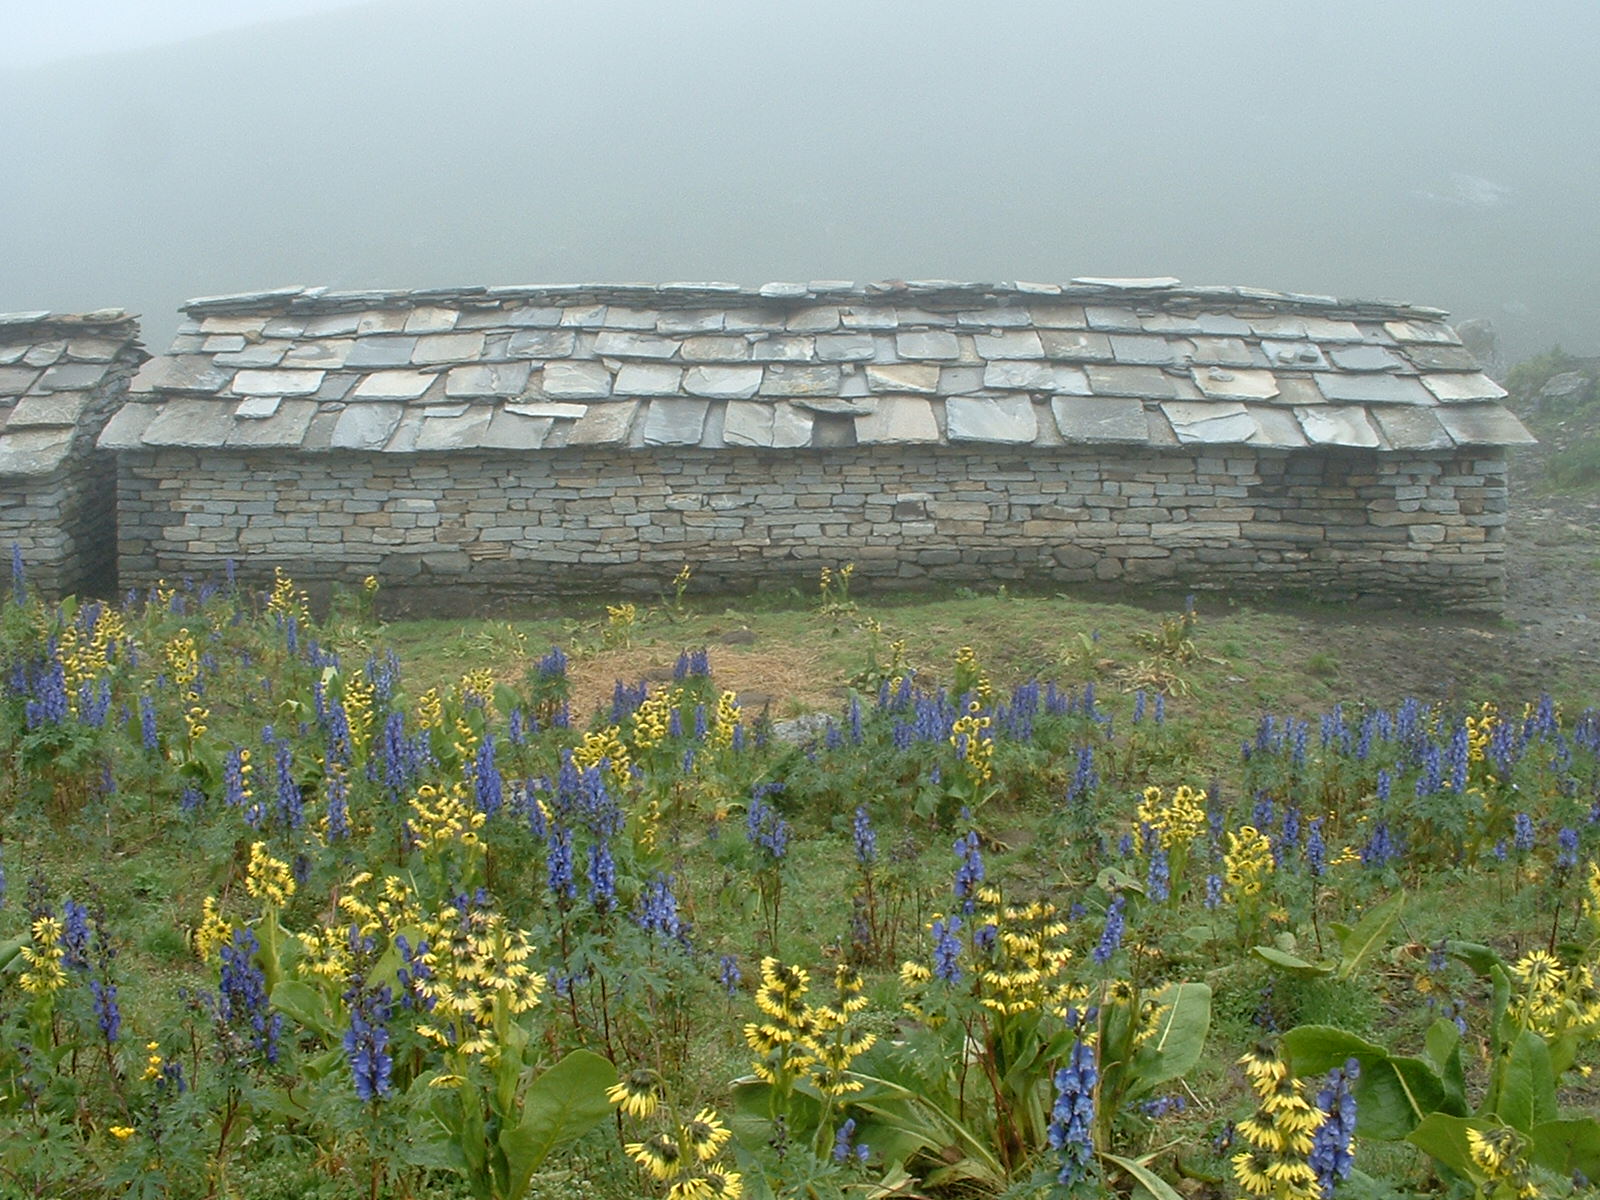 052 - Hut and flowers at 4500m